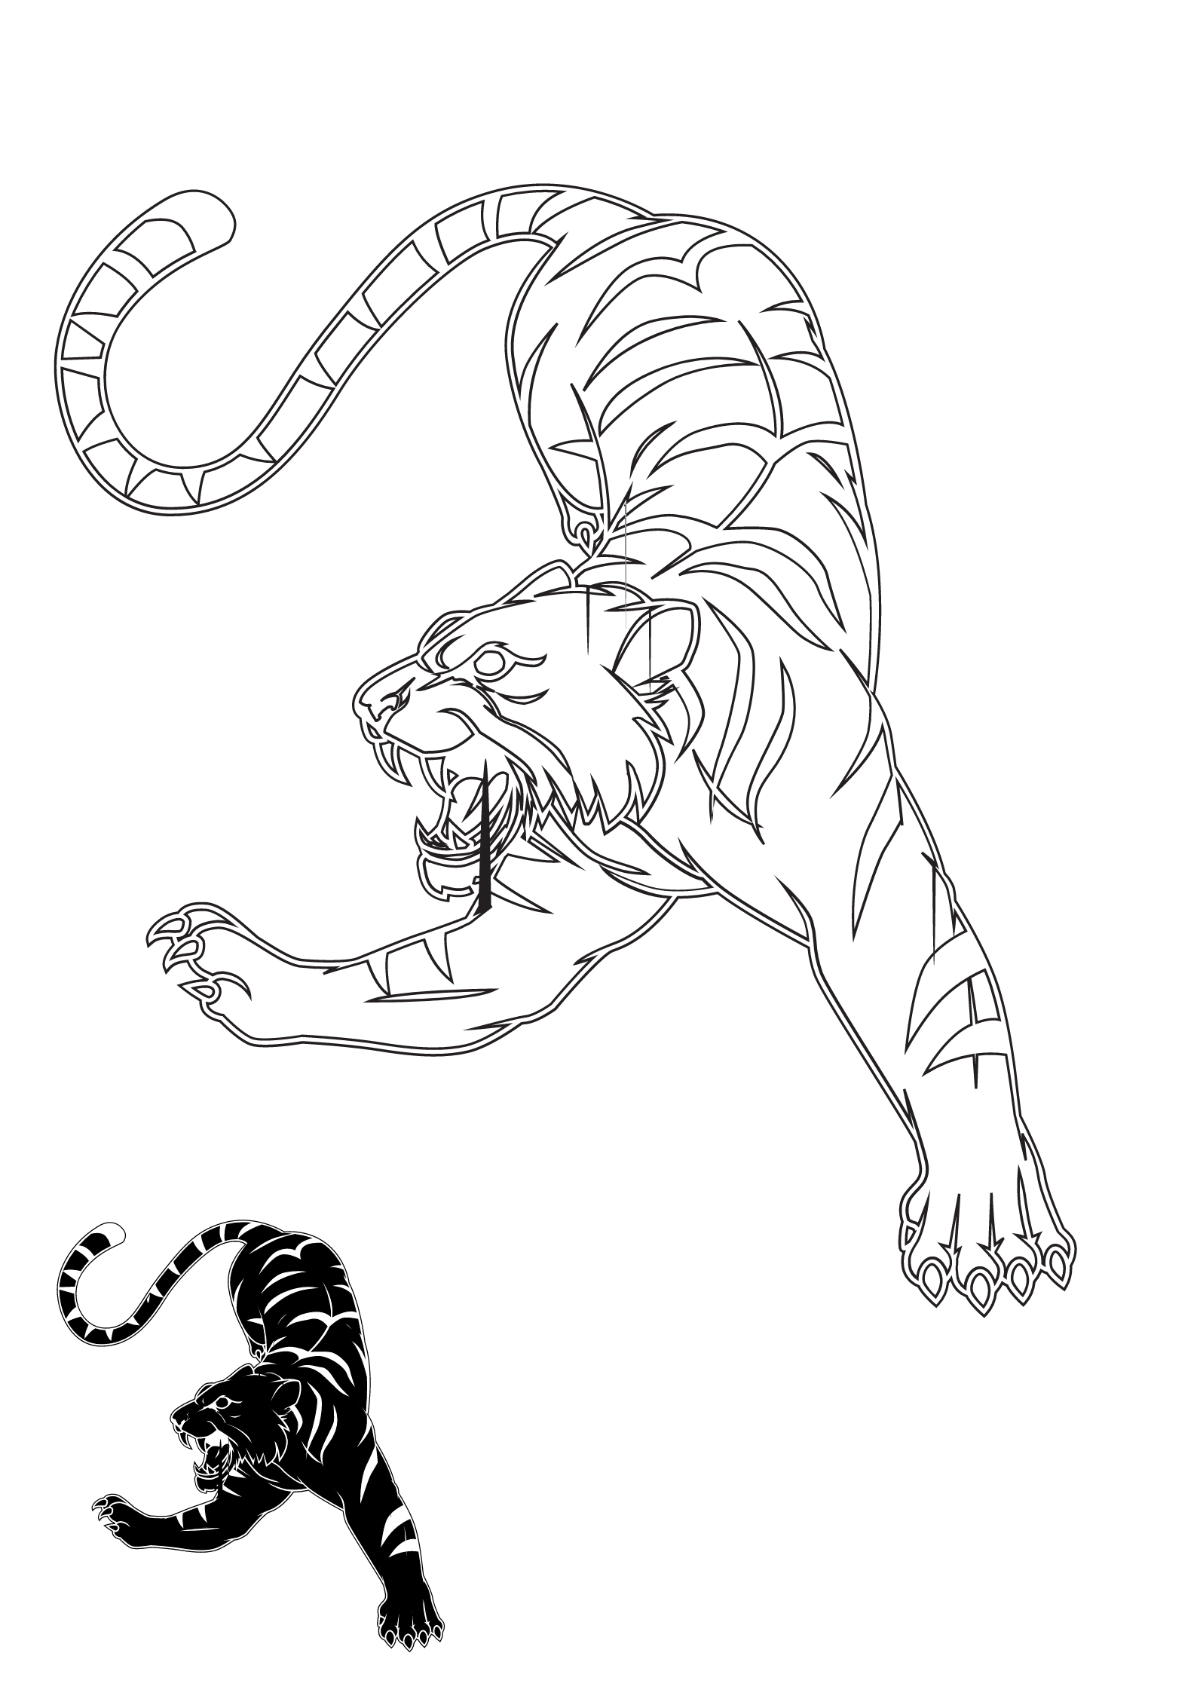 Black Tiger Coloring Page Template